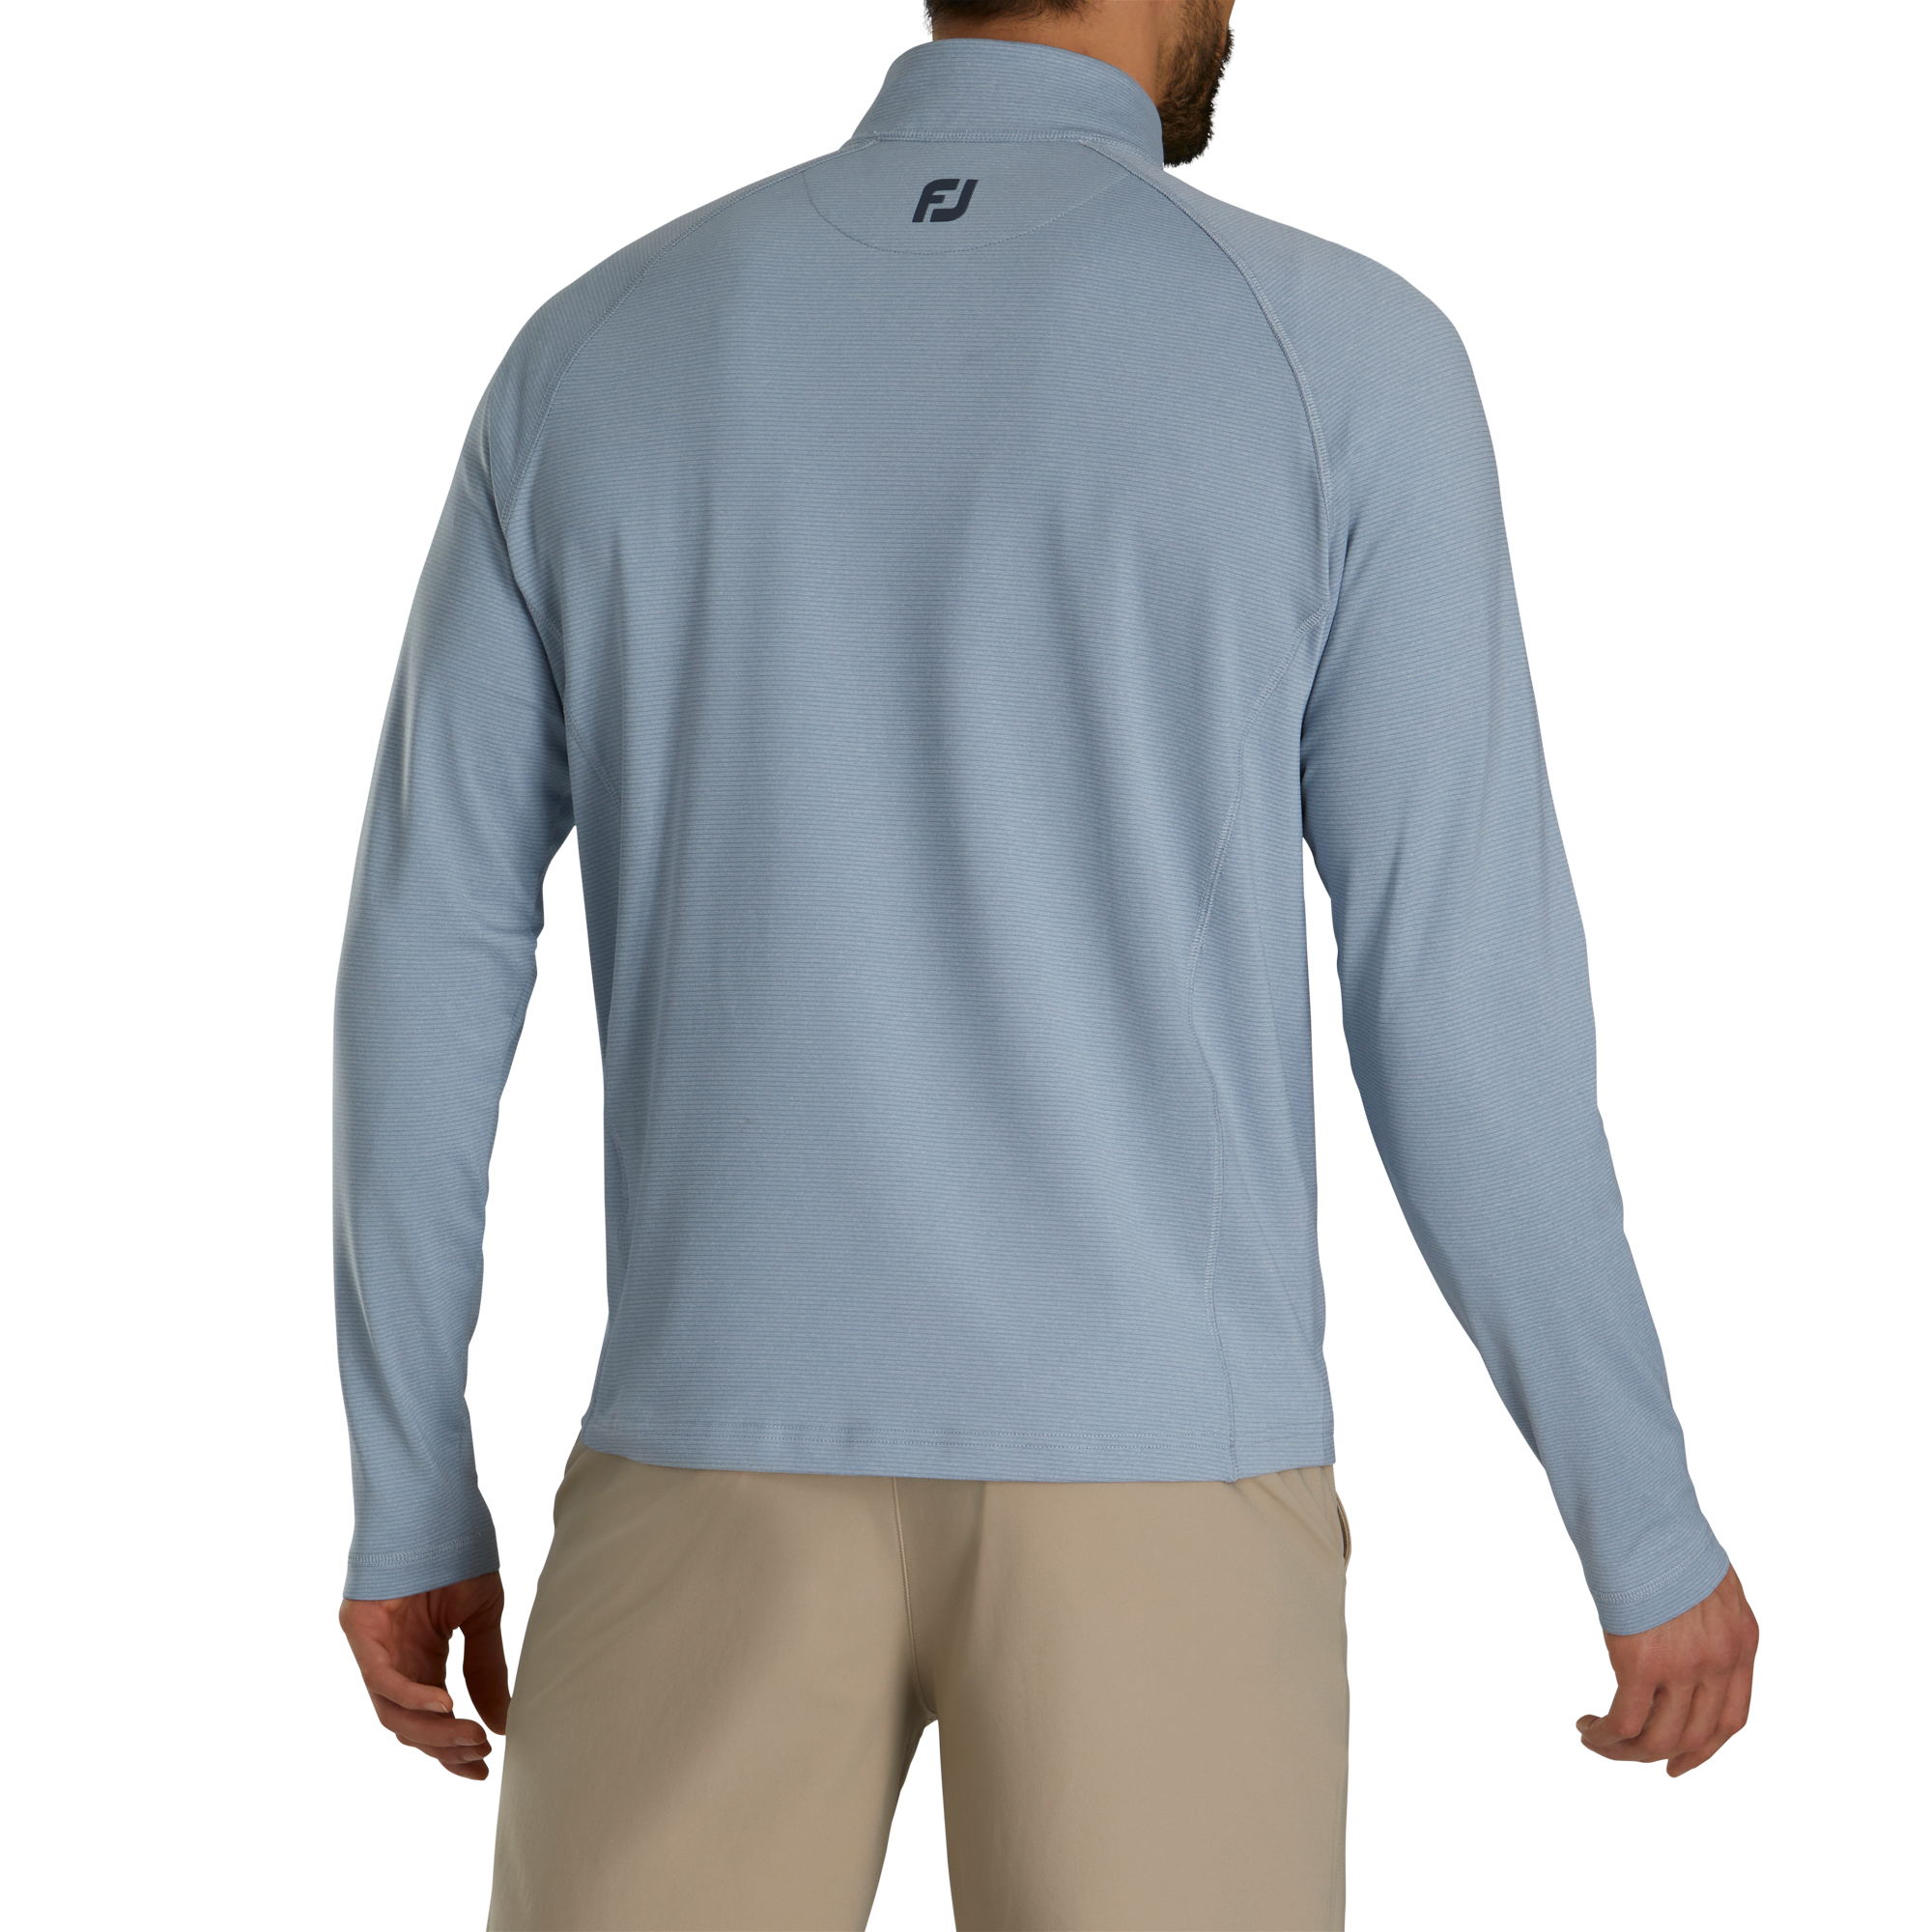 ThermoSeries Heather Brushed Back QTR Zip